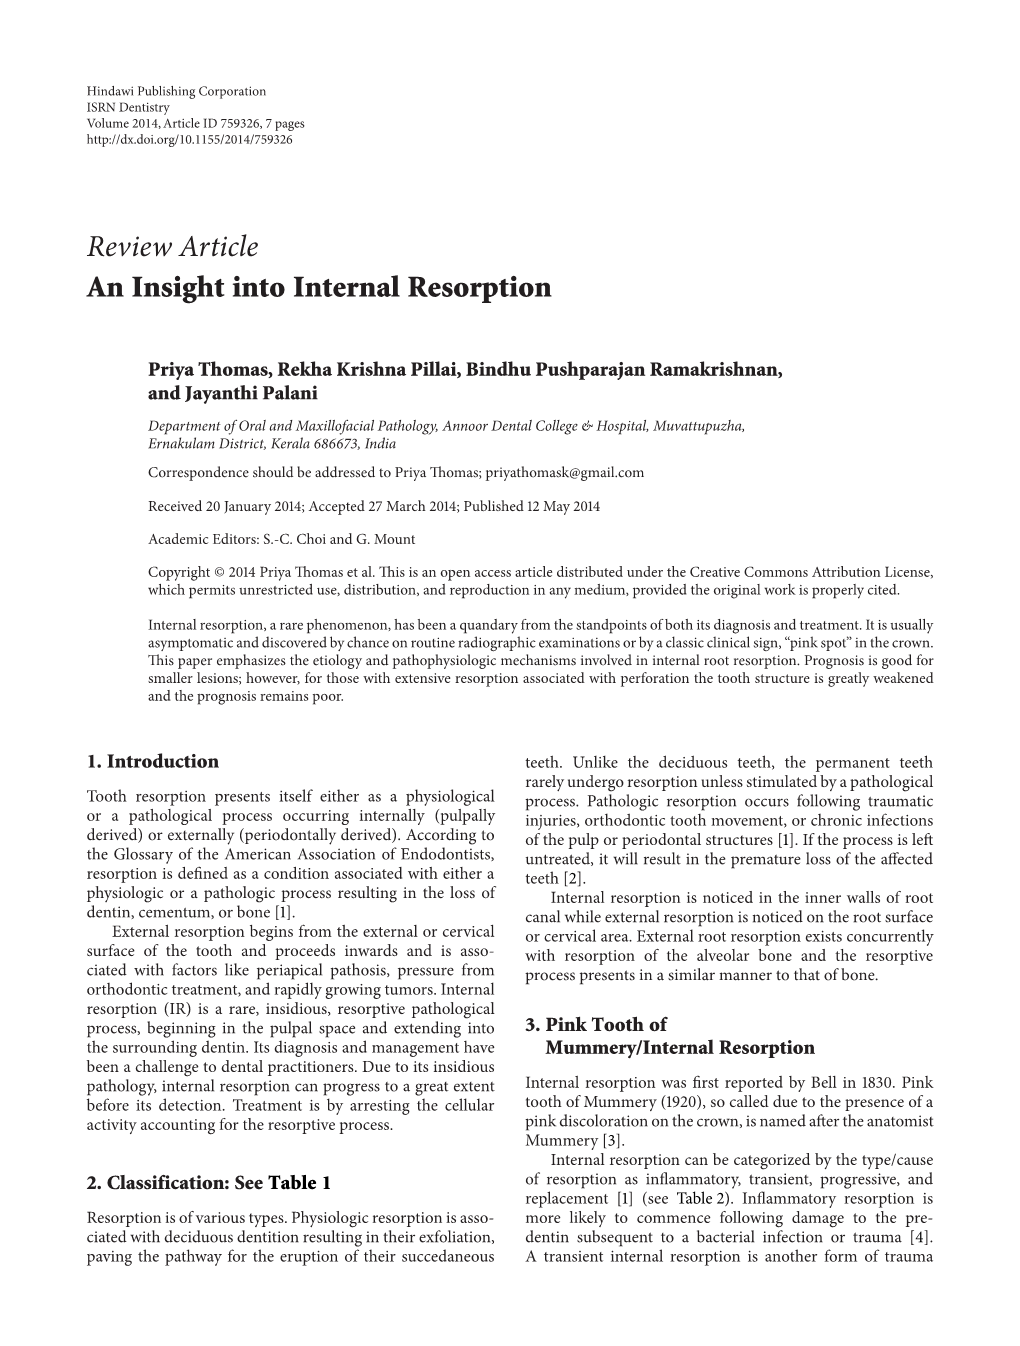 Review Article an Insight Into Internal Resorption